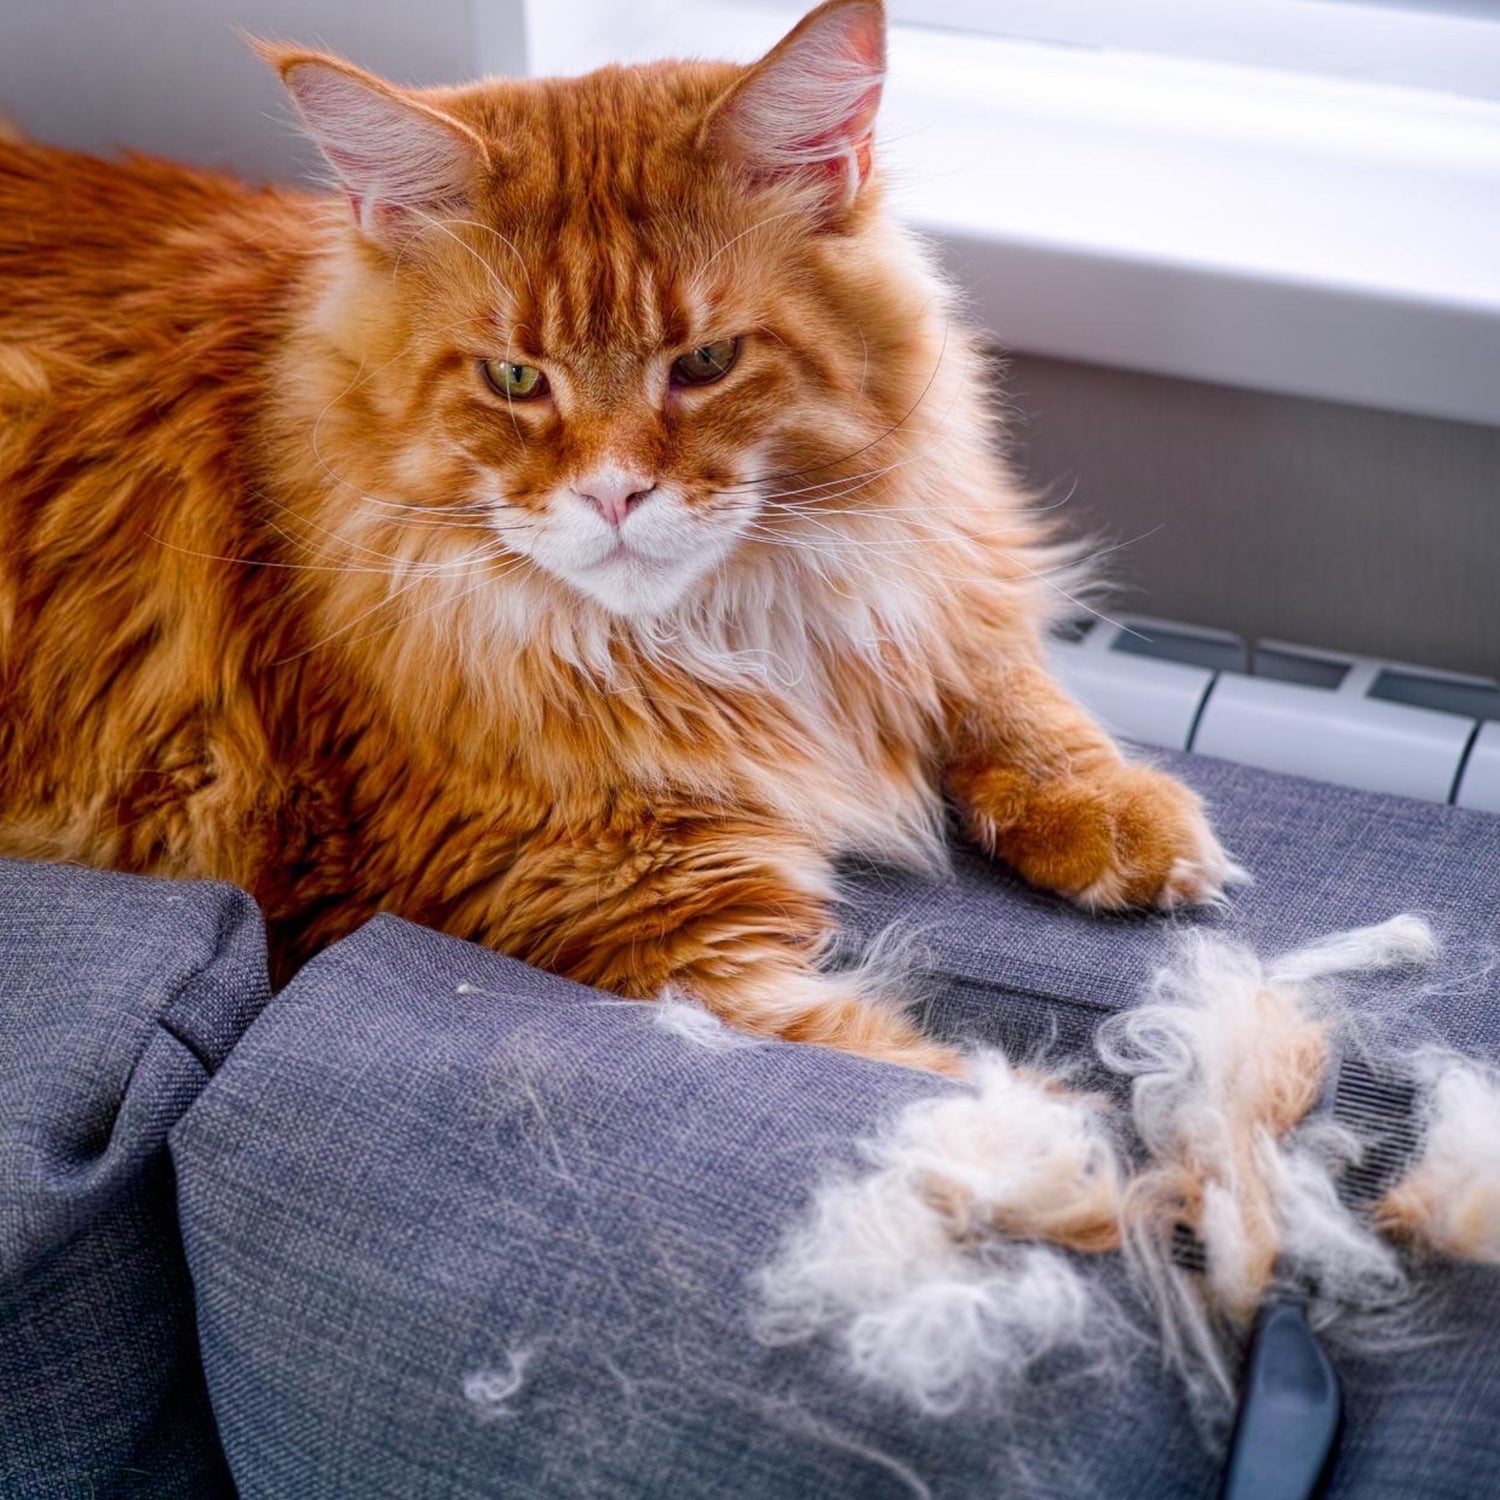 Fur Everywhere: The Guide to Cat Shedding and Pet Brushing